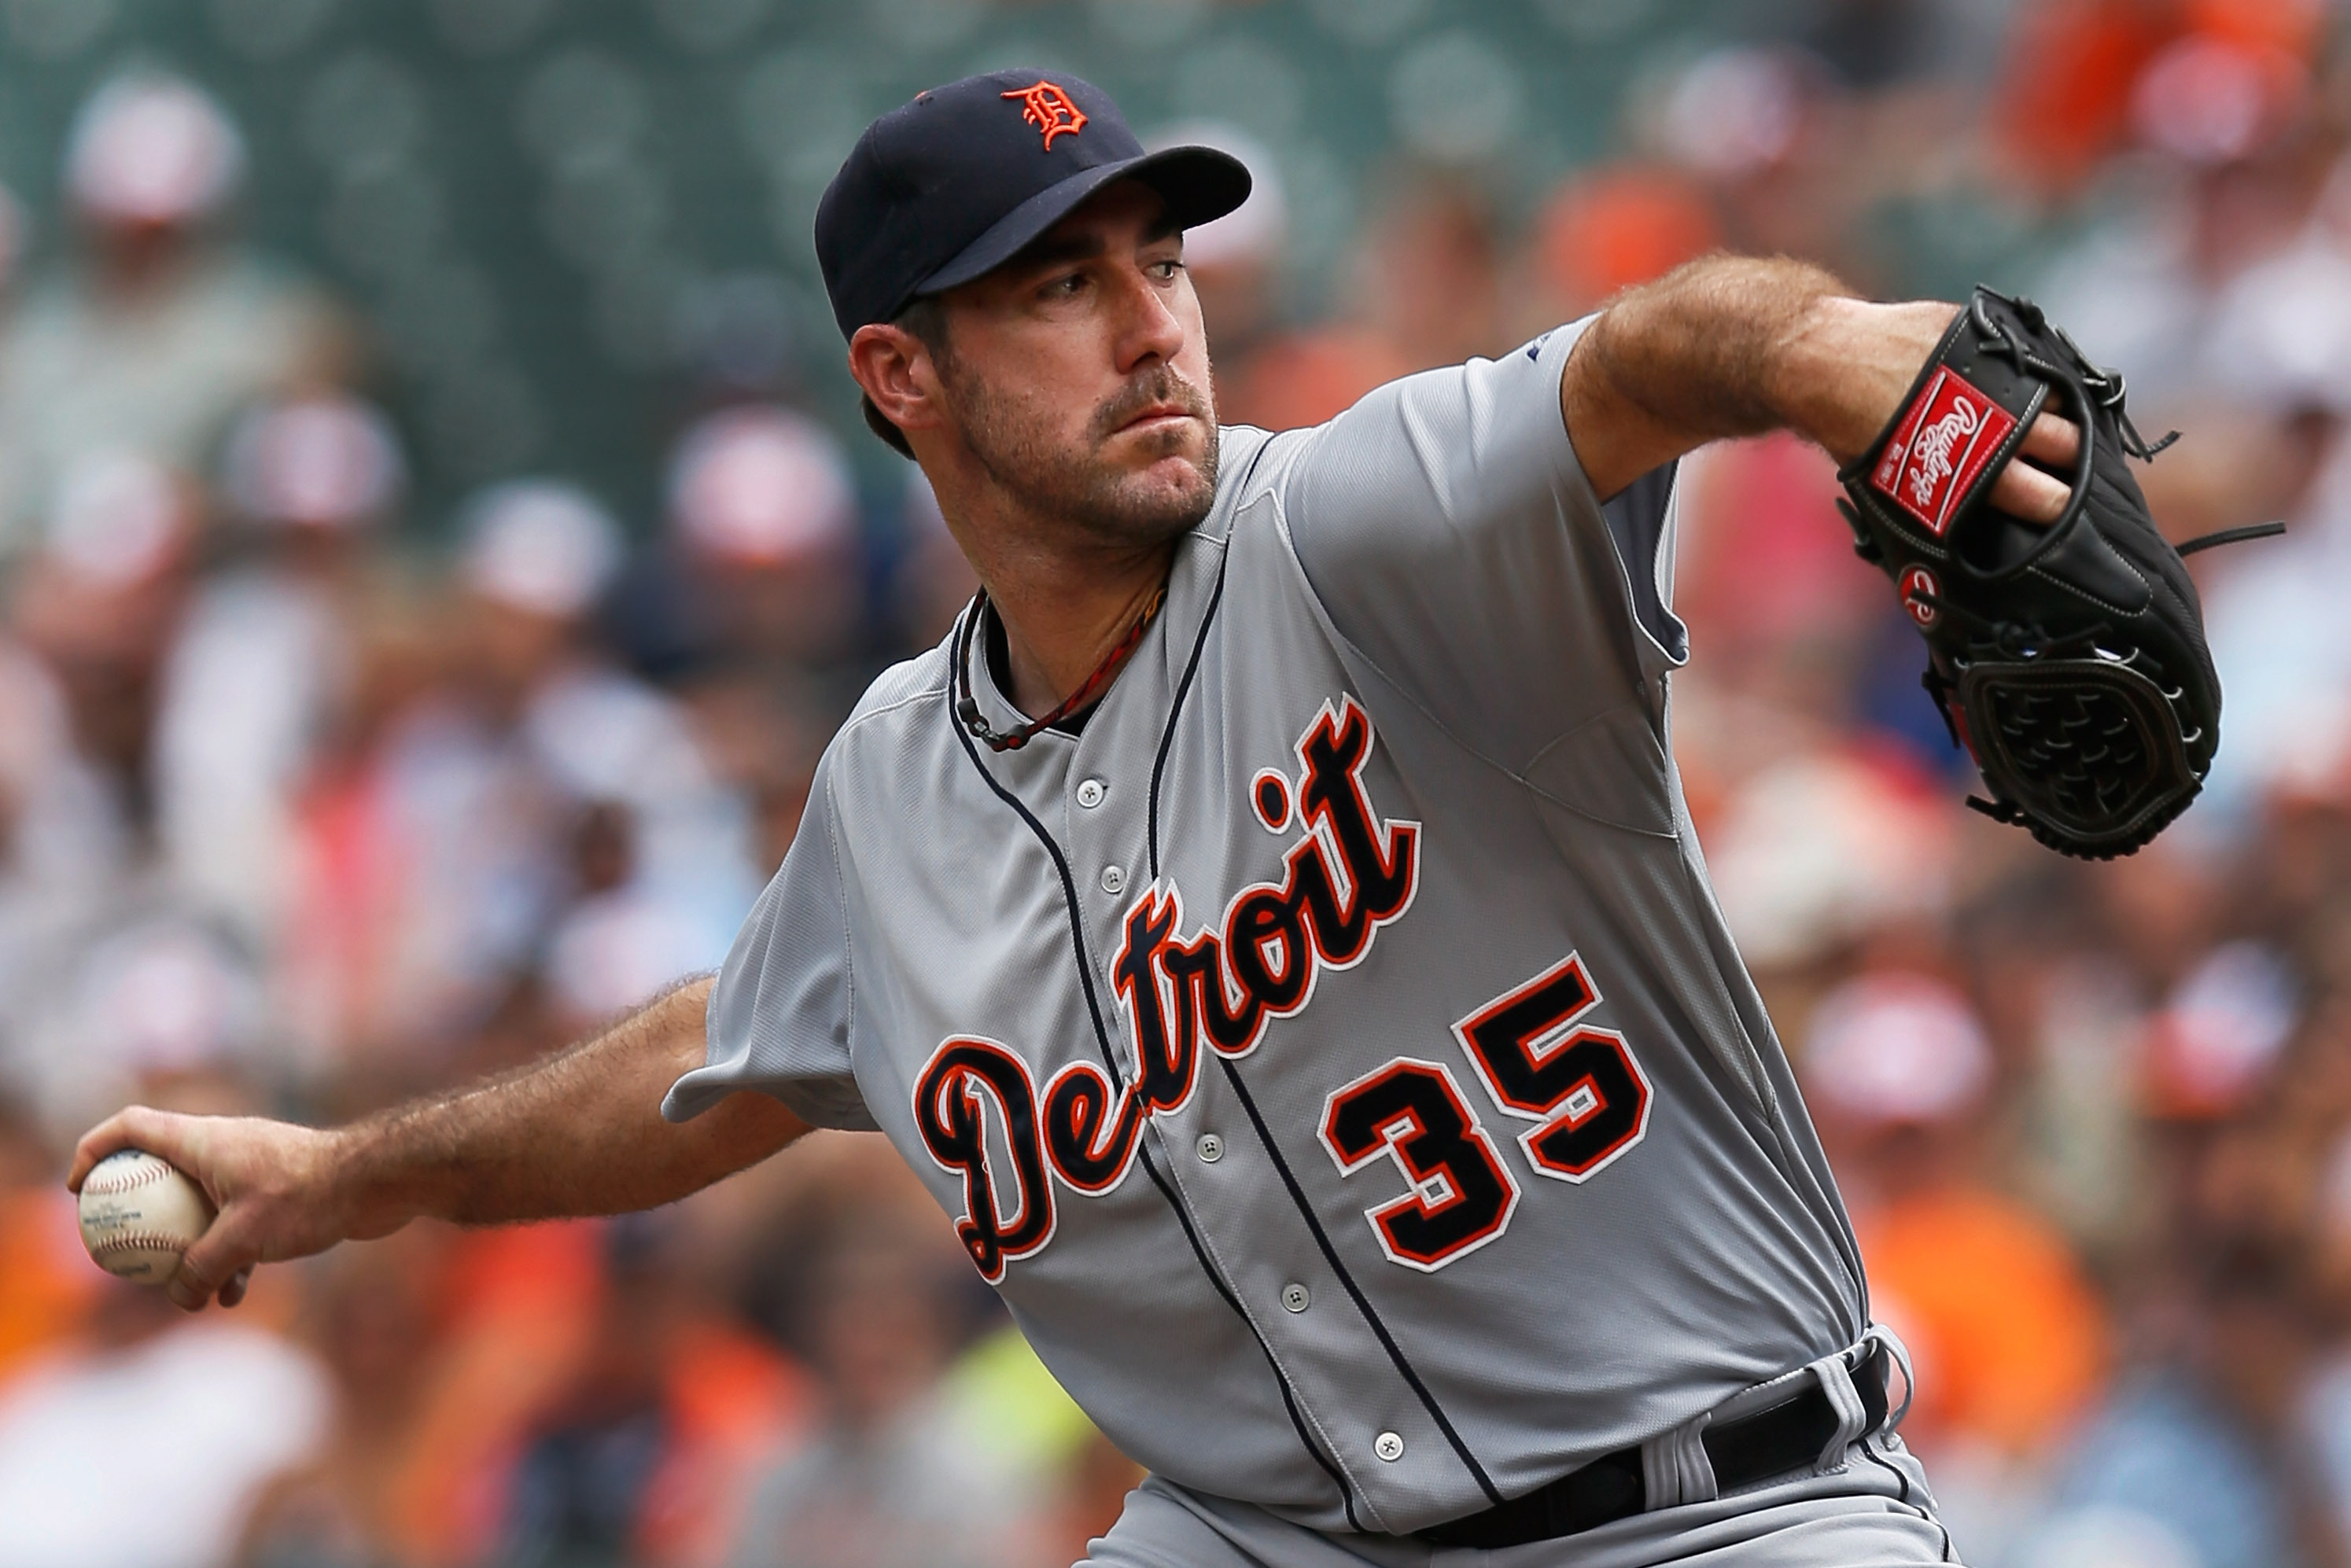 Tigers expect Verlander to adjust style, bounce back